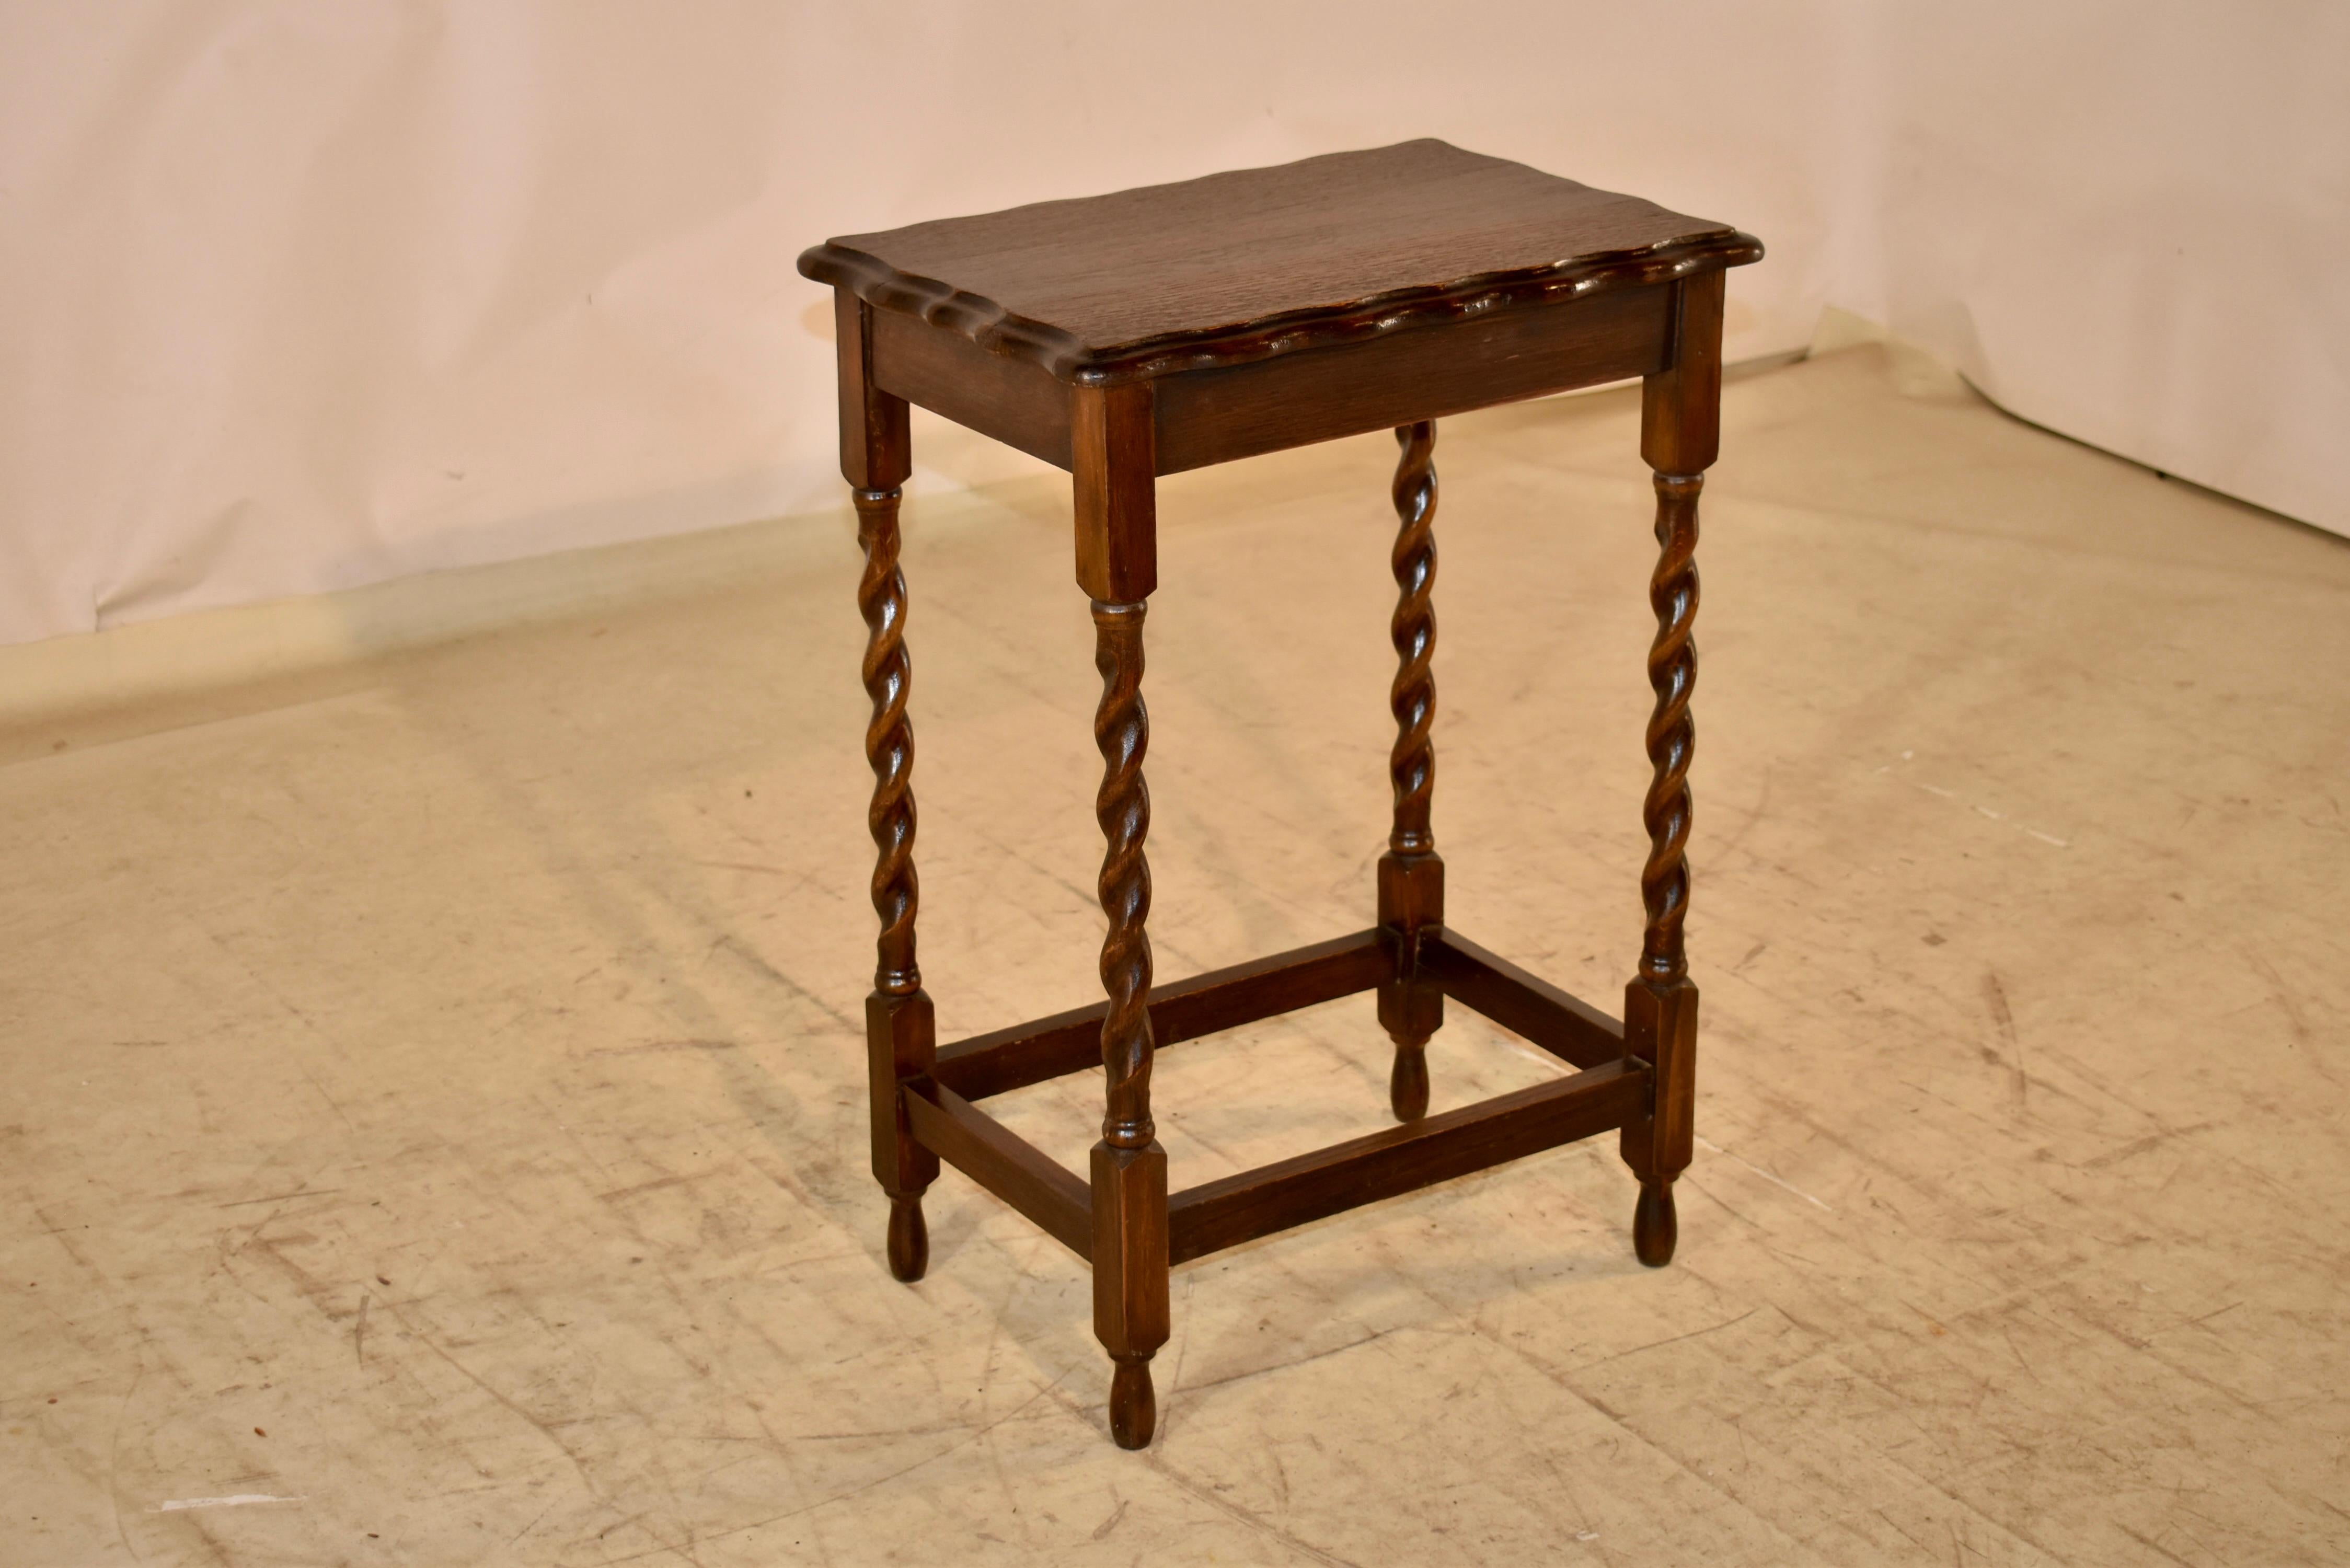 Circa 1900 English oak side table with a beveled and scalloped edge, following down to a simple apron and supported on hand turned barley twist legs, joined by simple stretchers.  The table is raised on hand turned feet.